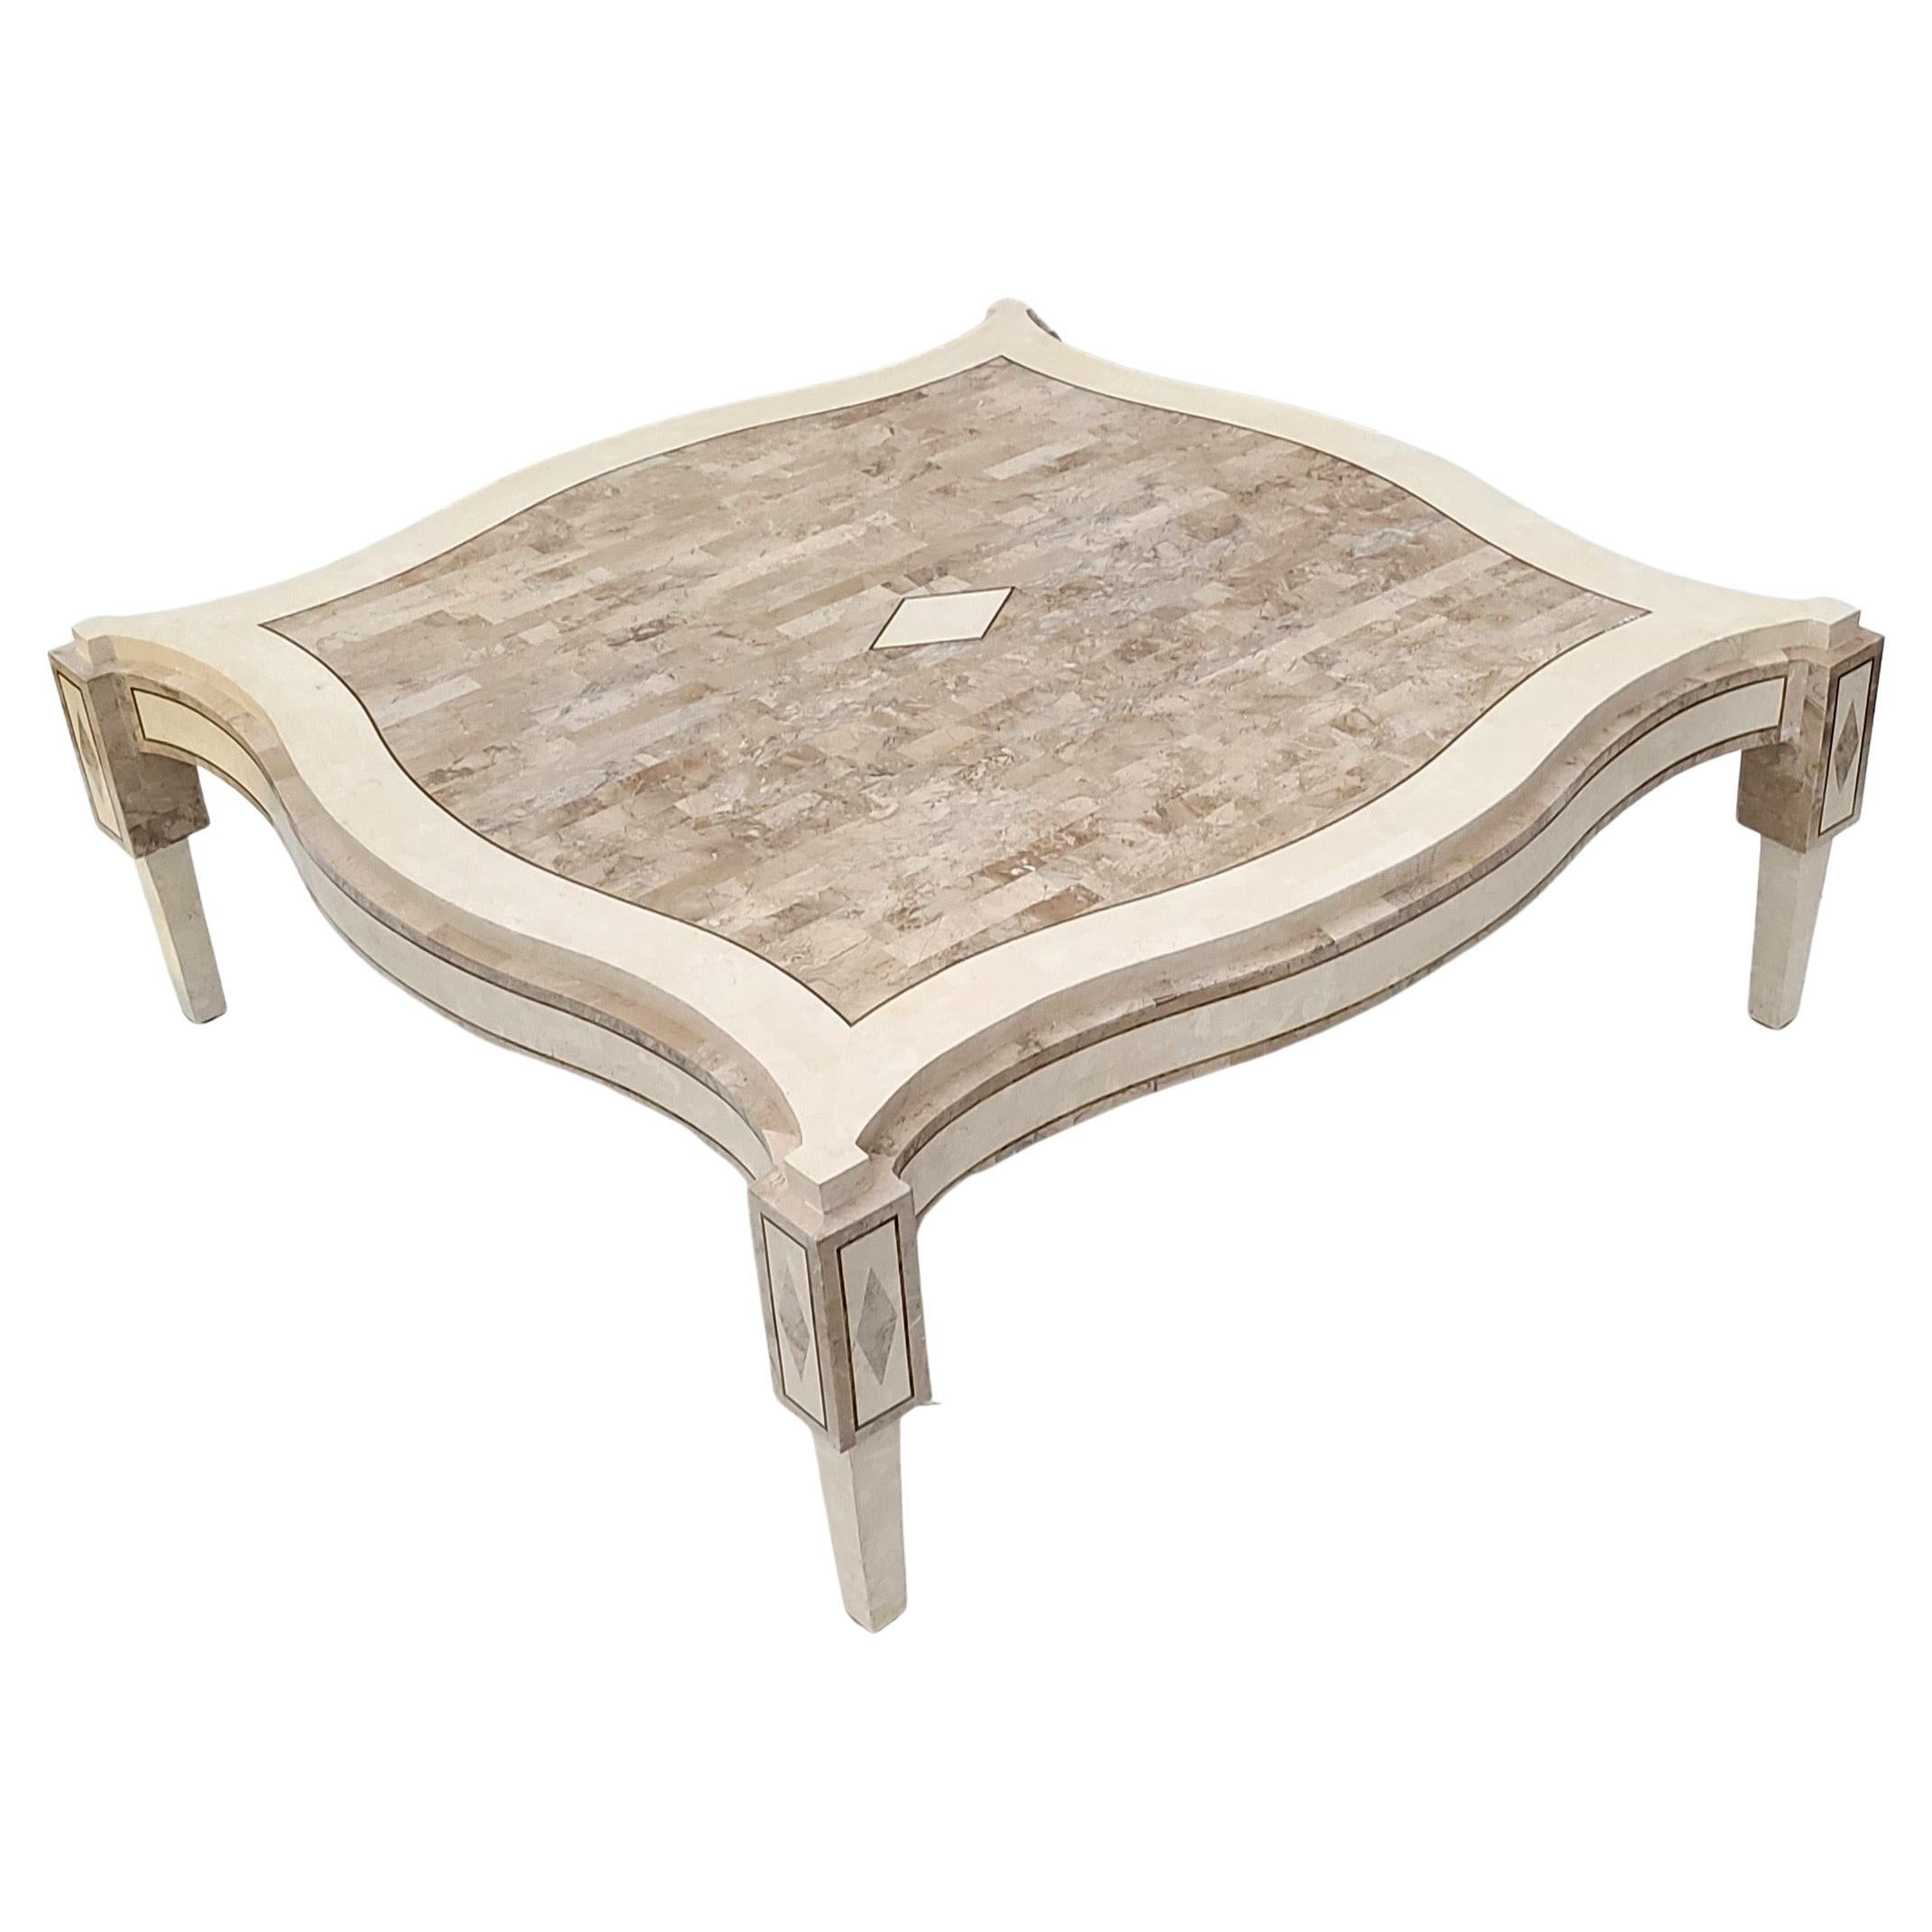 Please reach out for efficient shipping quote to your location.

Elegant tessellated stone coffee table by Maitland Smith.